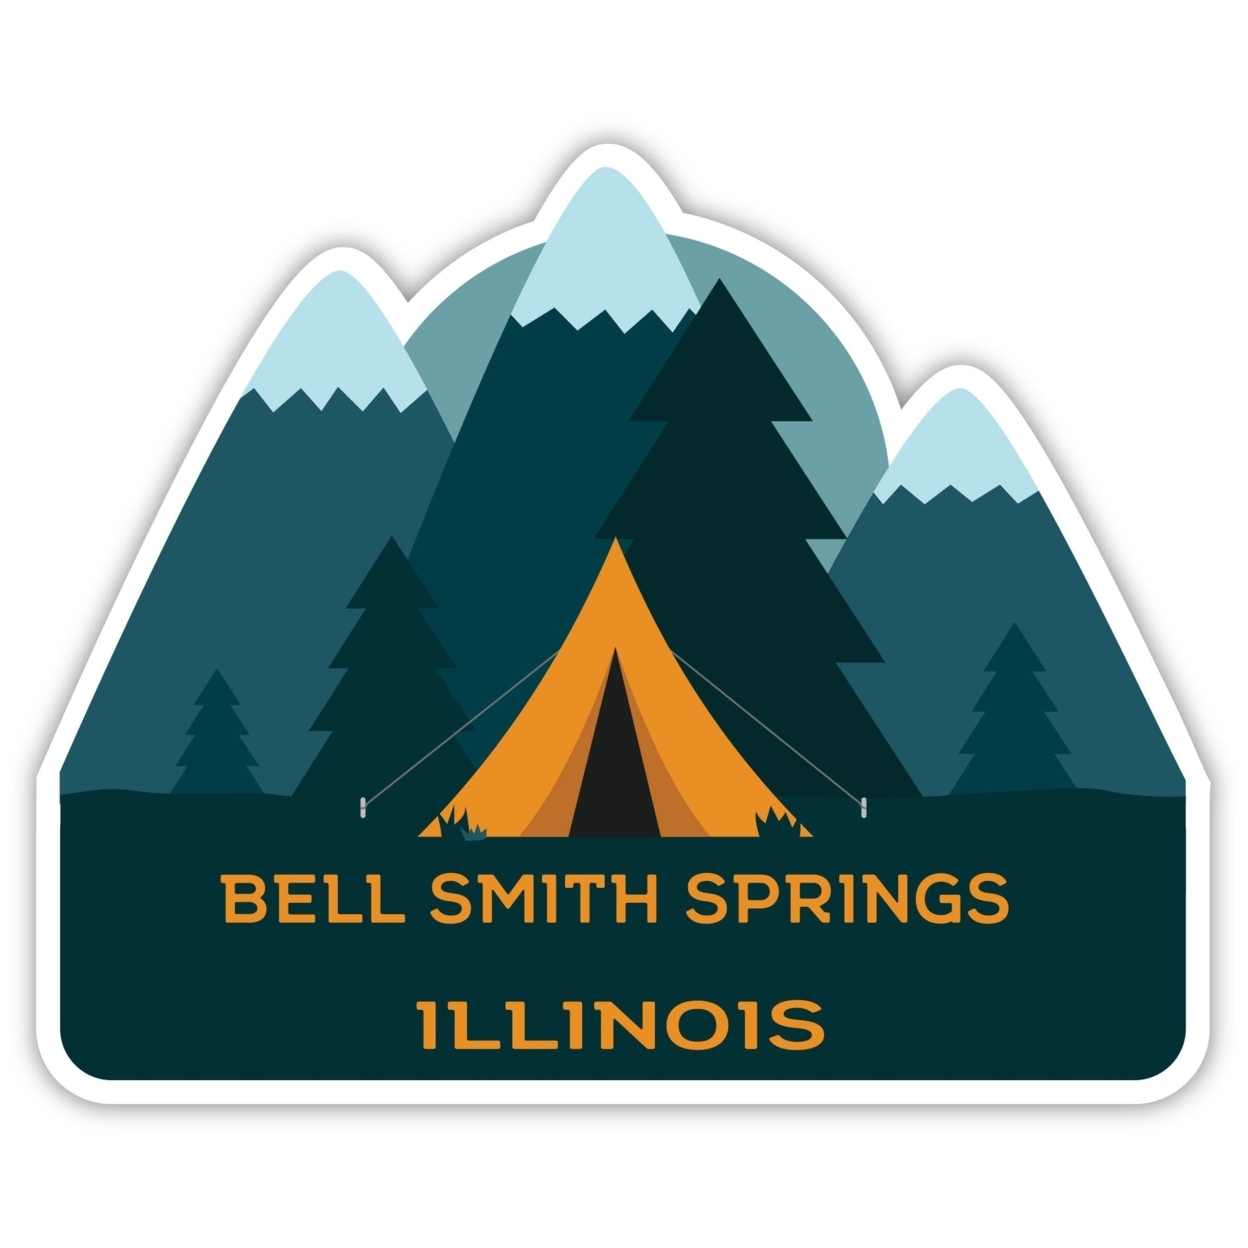 Bell Smith Springs Illinois Souvenir Decorative Stickers (Choose Theme And Size) - Single Unit, 6-Inch, Tent